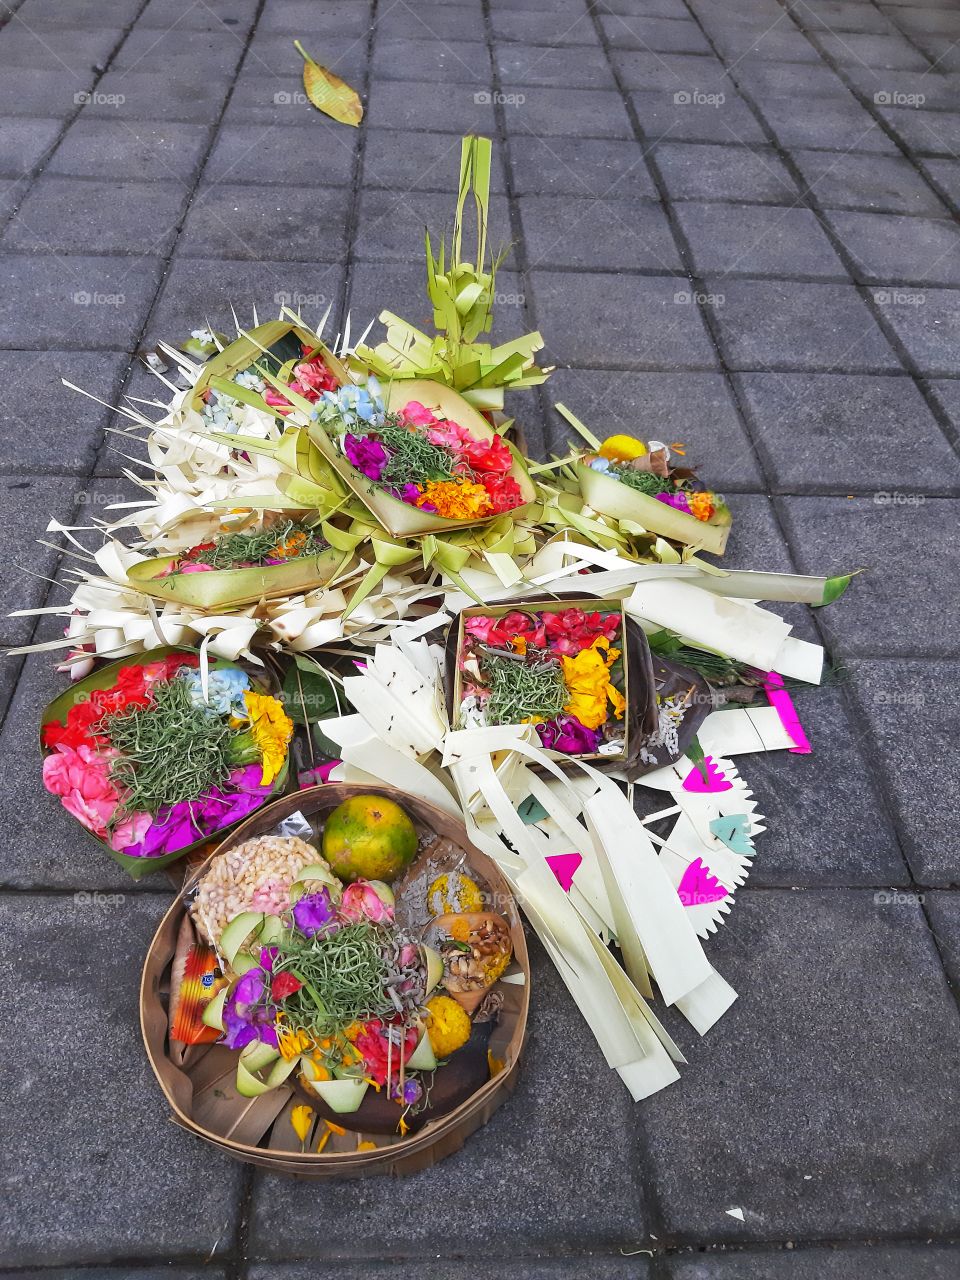 Colorful balinese offerings that was made of natura materials